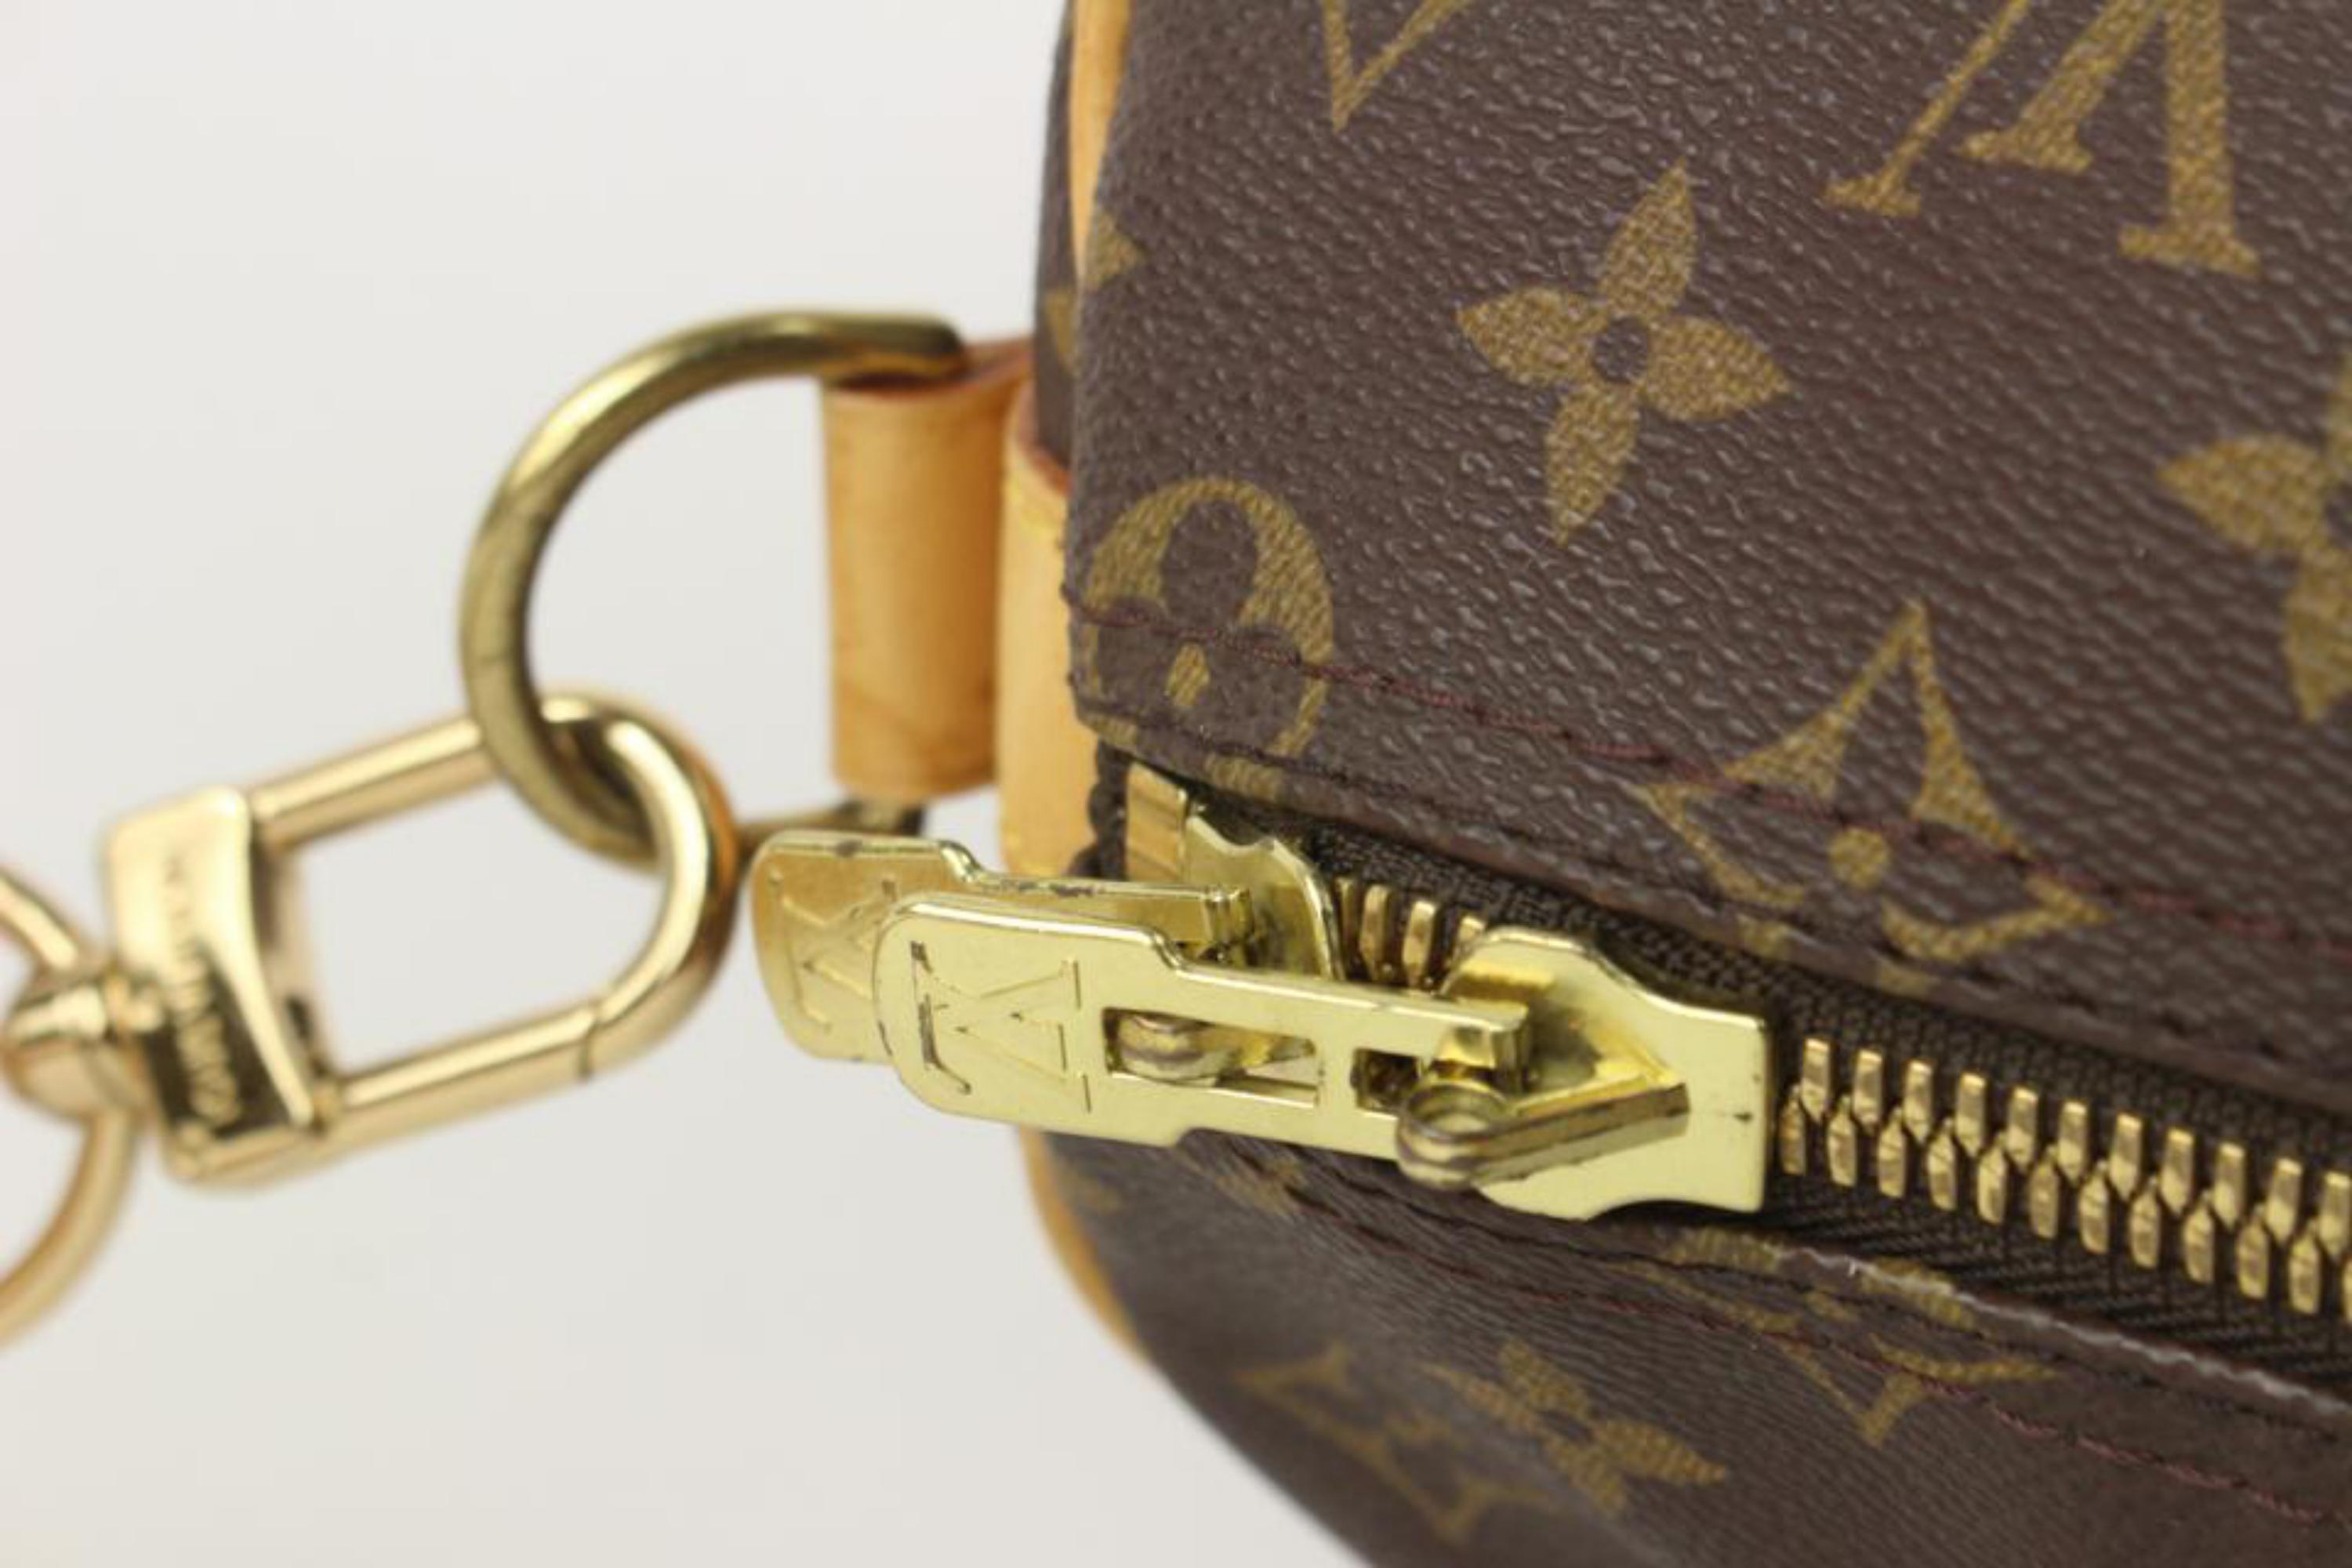 Louis Vuitton Monogram Keepall Bandouliere 45 Duffle Bag with Strap 1221lv15 2